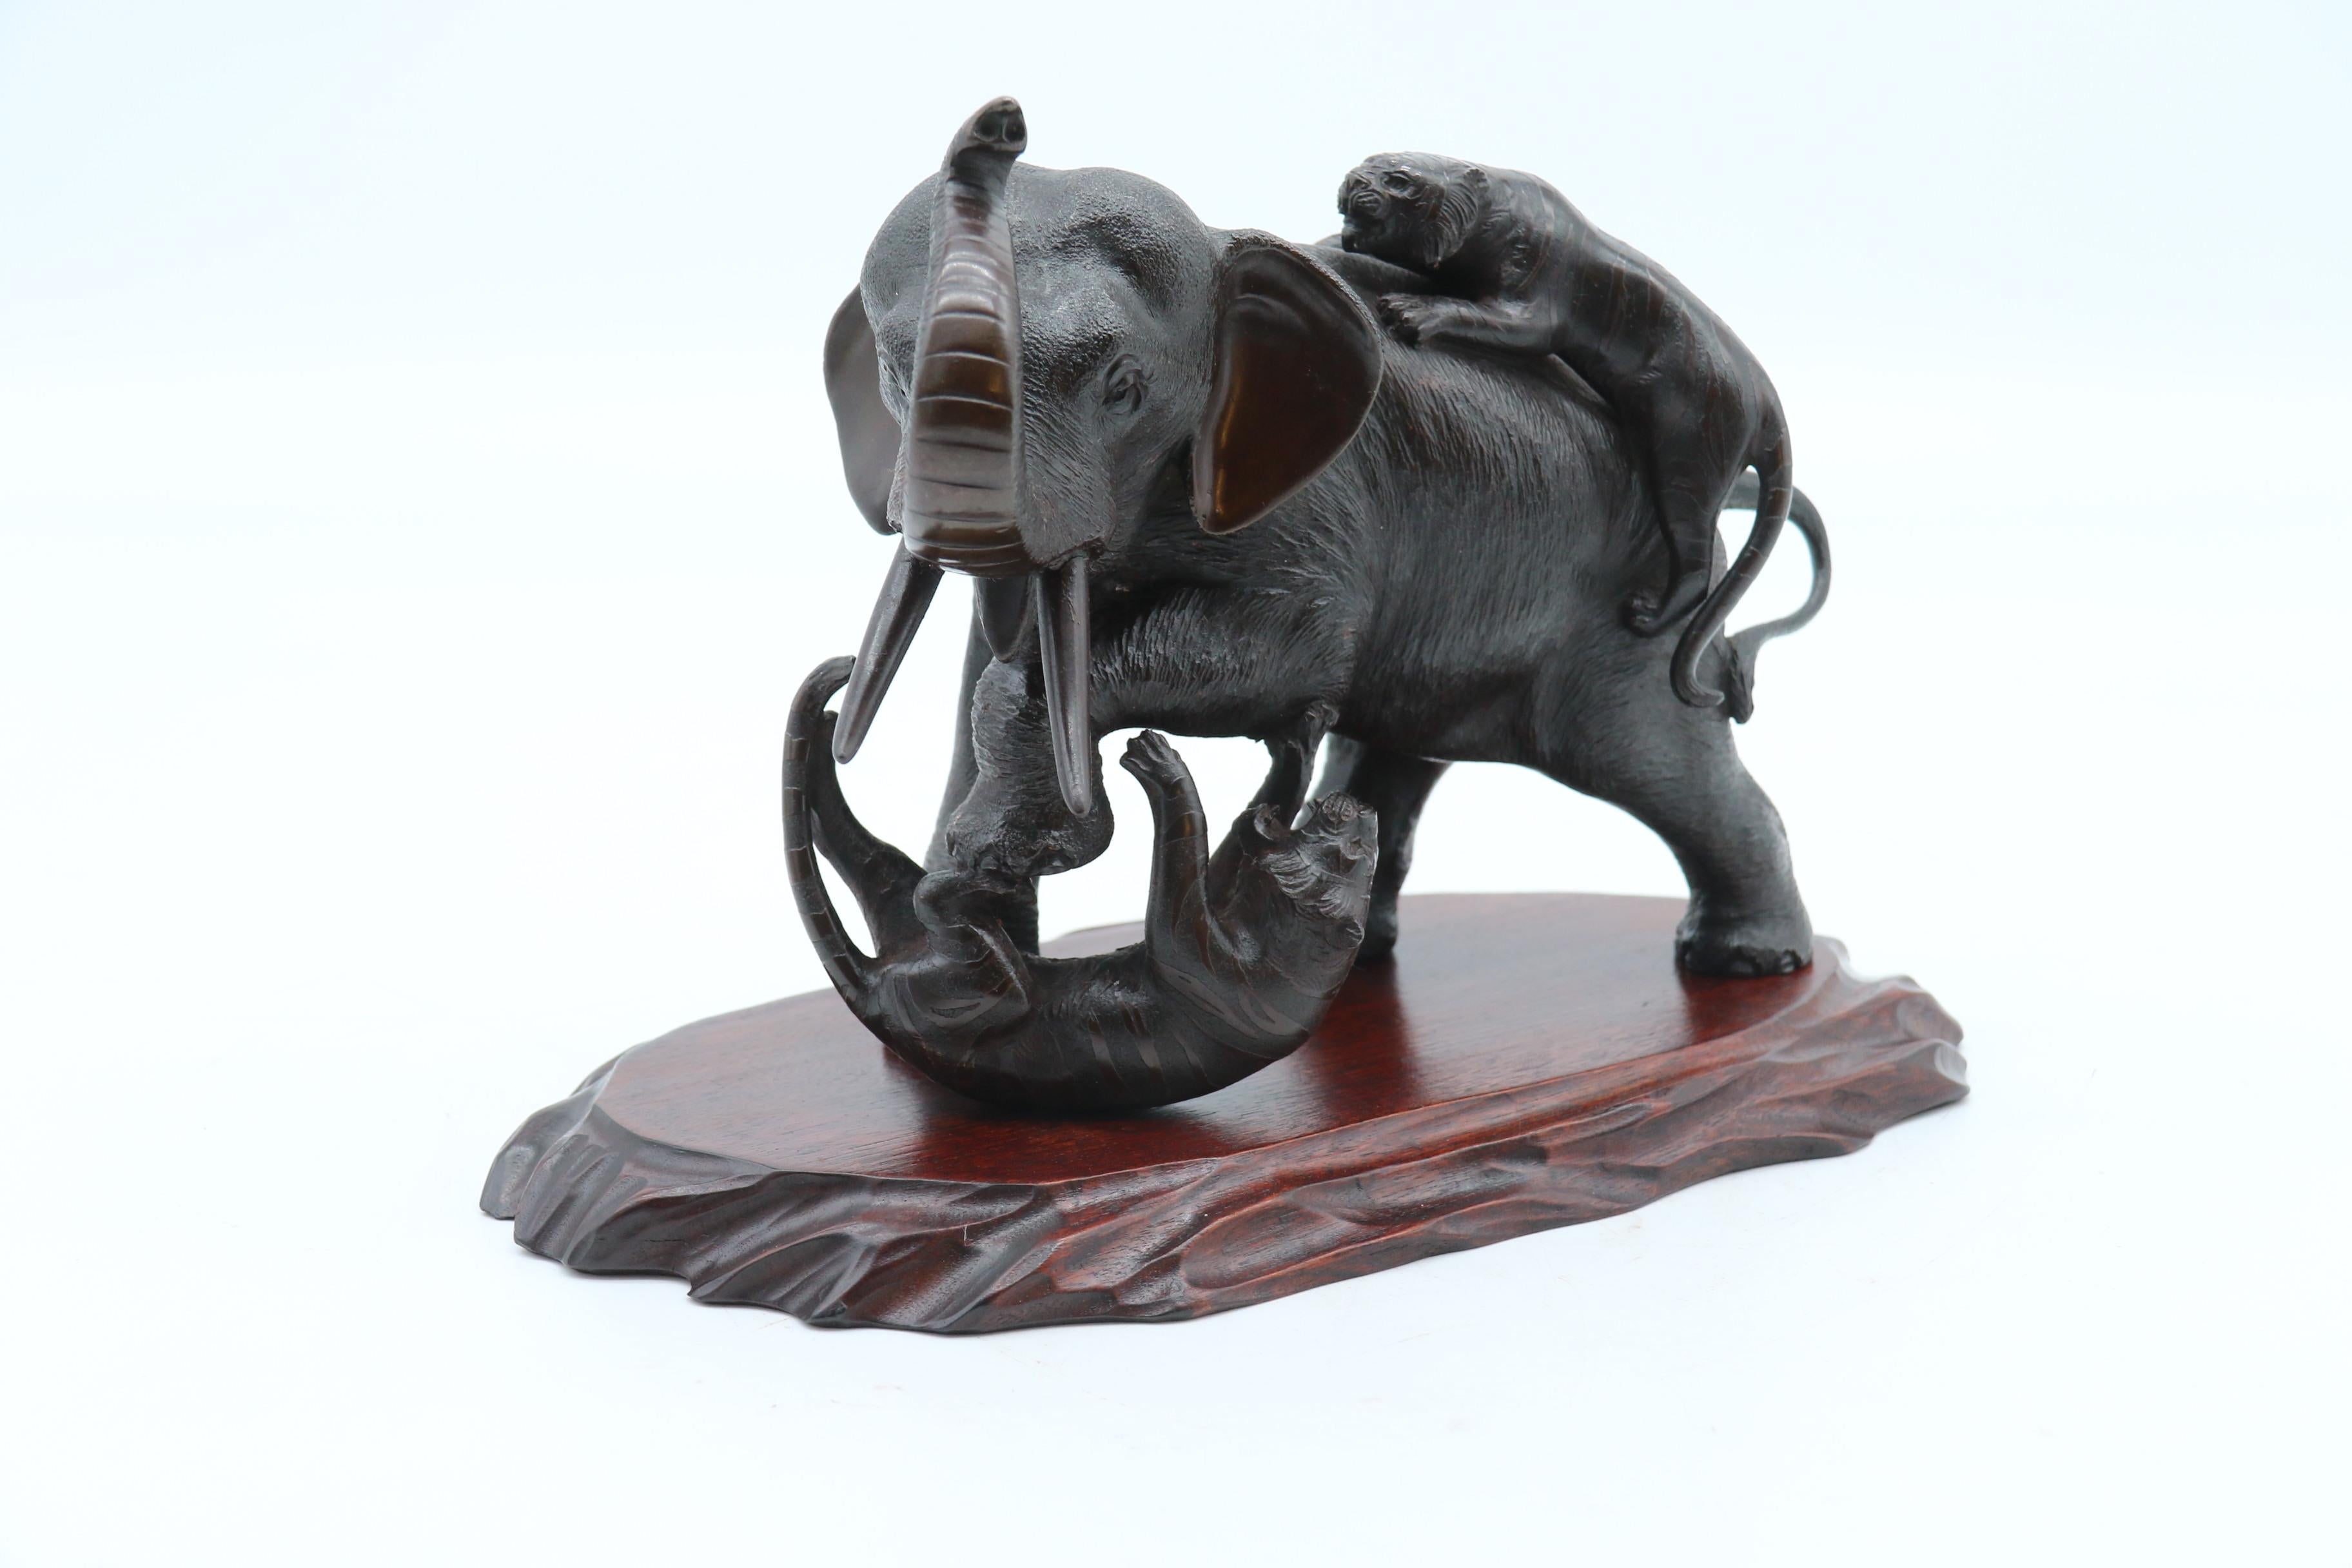 This superb Japanese Meiji period bronze study has exceptionally good detailing. It portrays a figure group of a large muscular bull elephant being attacked and fighting with two tigers. One is clinging to his back and the other has been knocked to